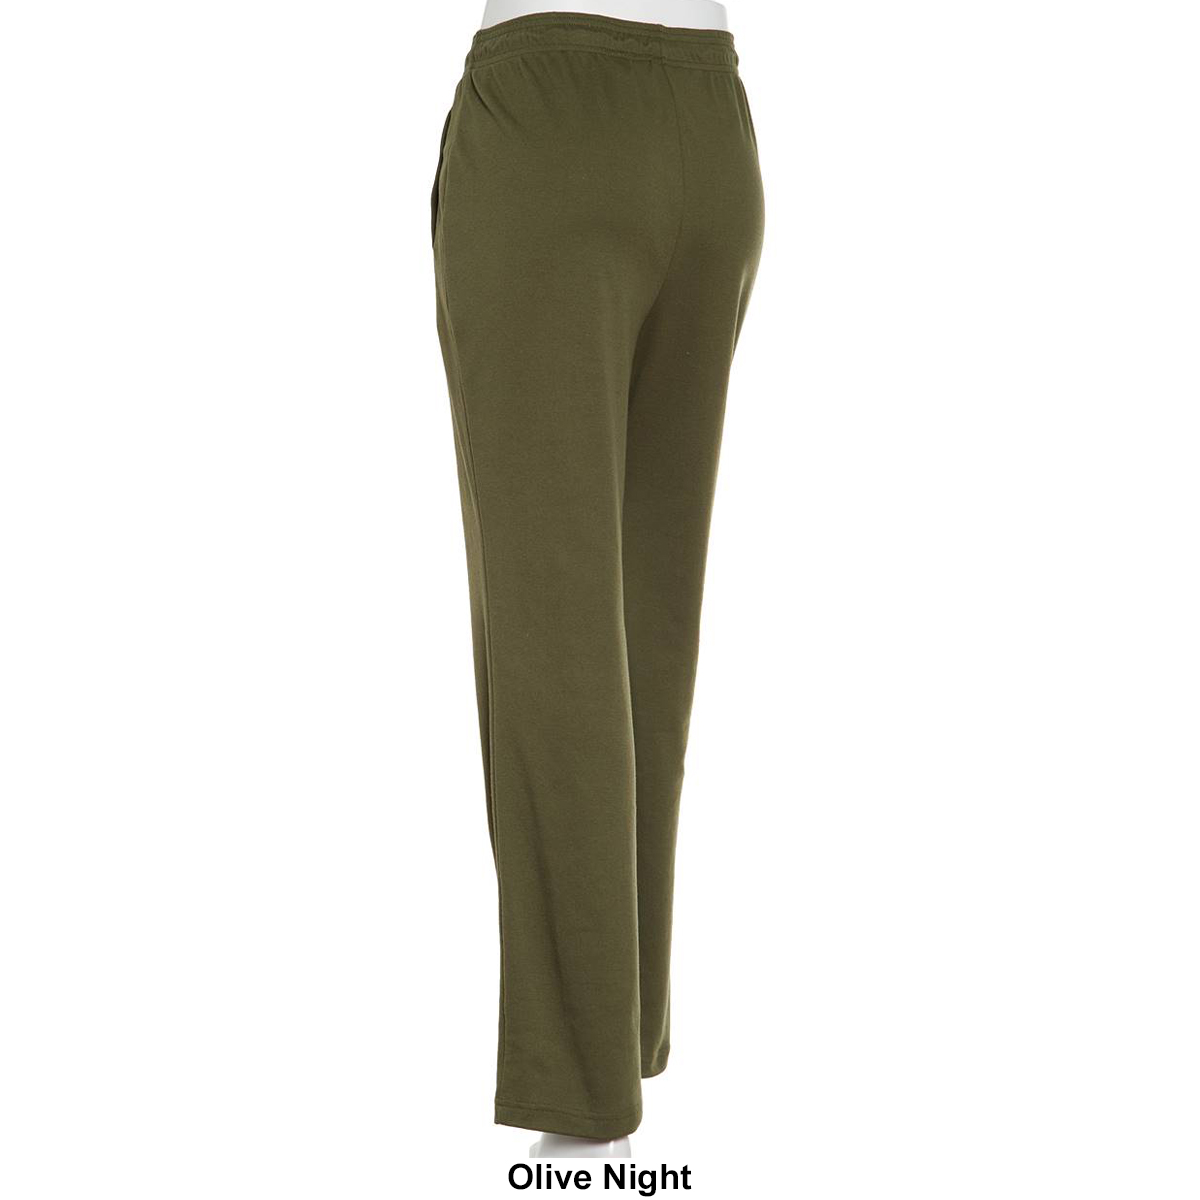 Womens Hasting & Smith Knit Pants - Average